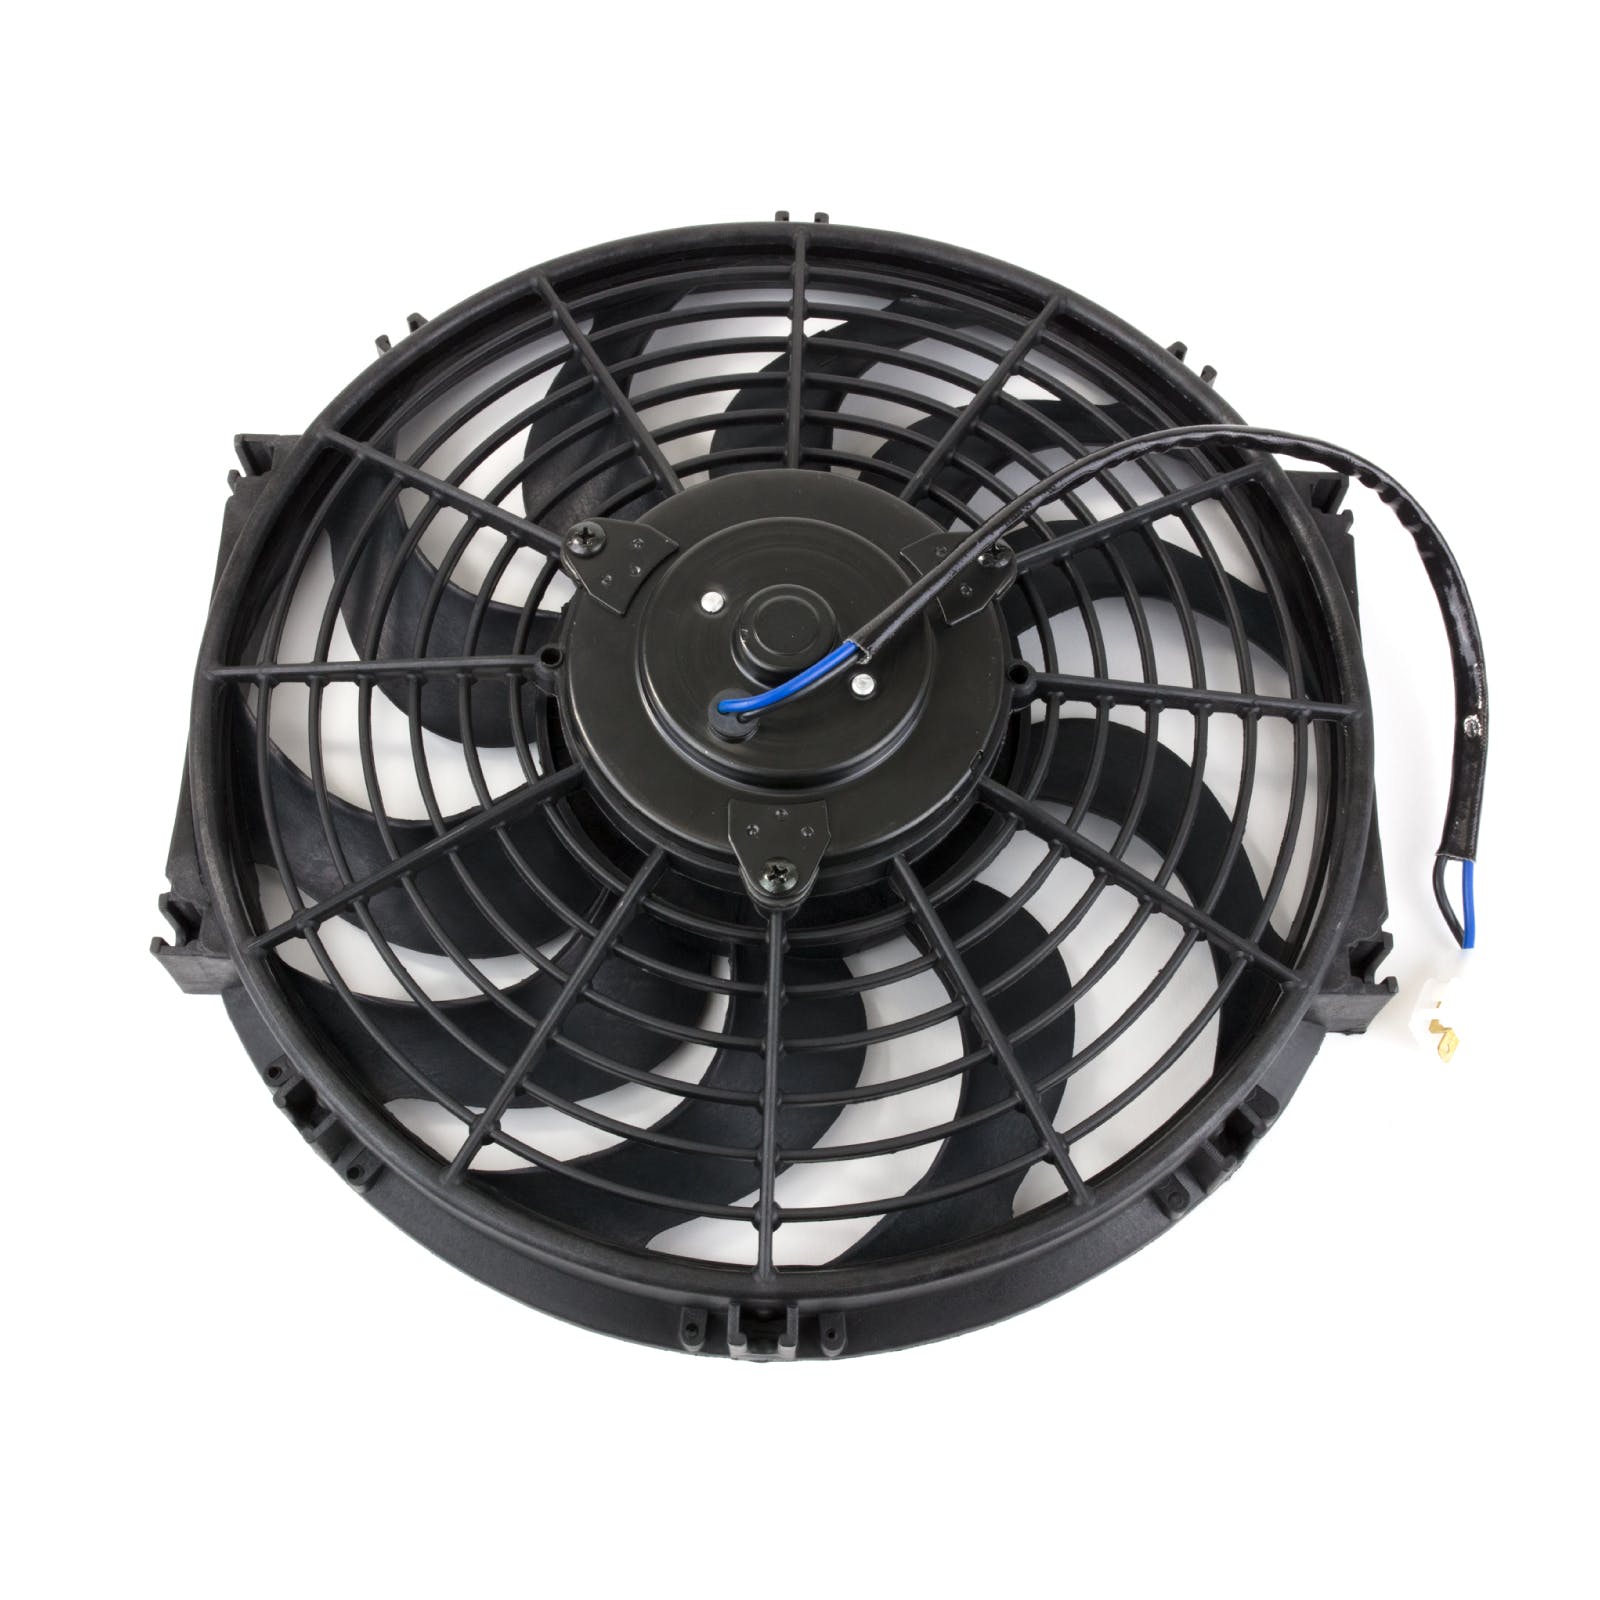 Top Street Performance HC6103 12 inch Universal Electric Cooling Fan, S-Blade